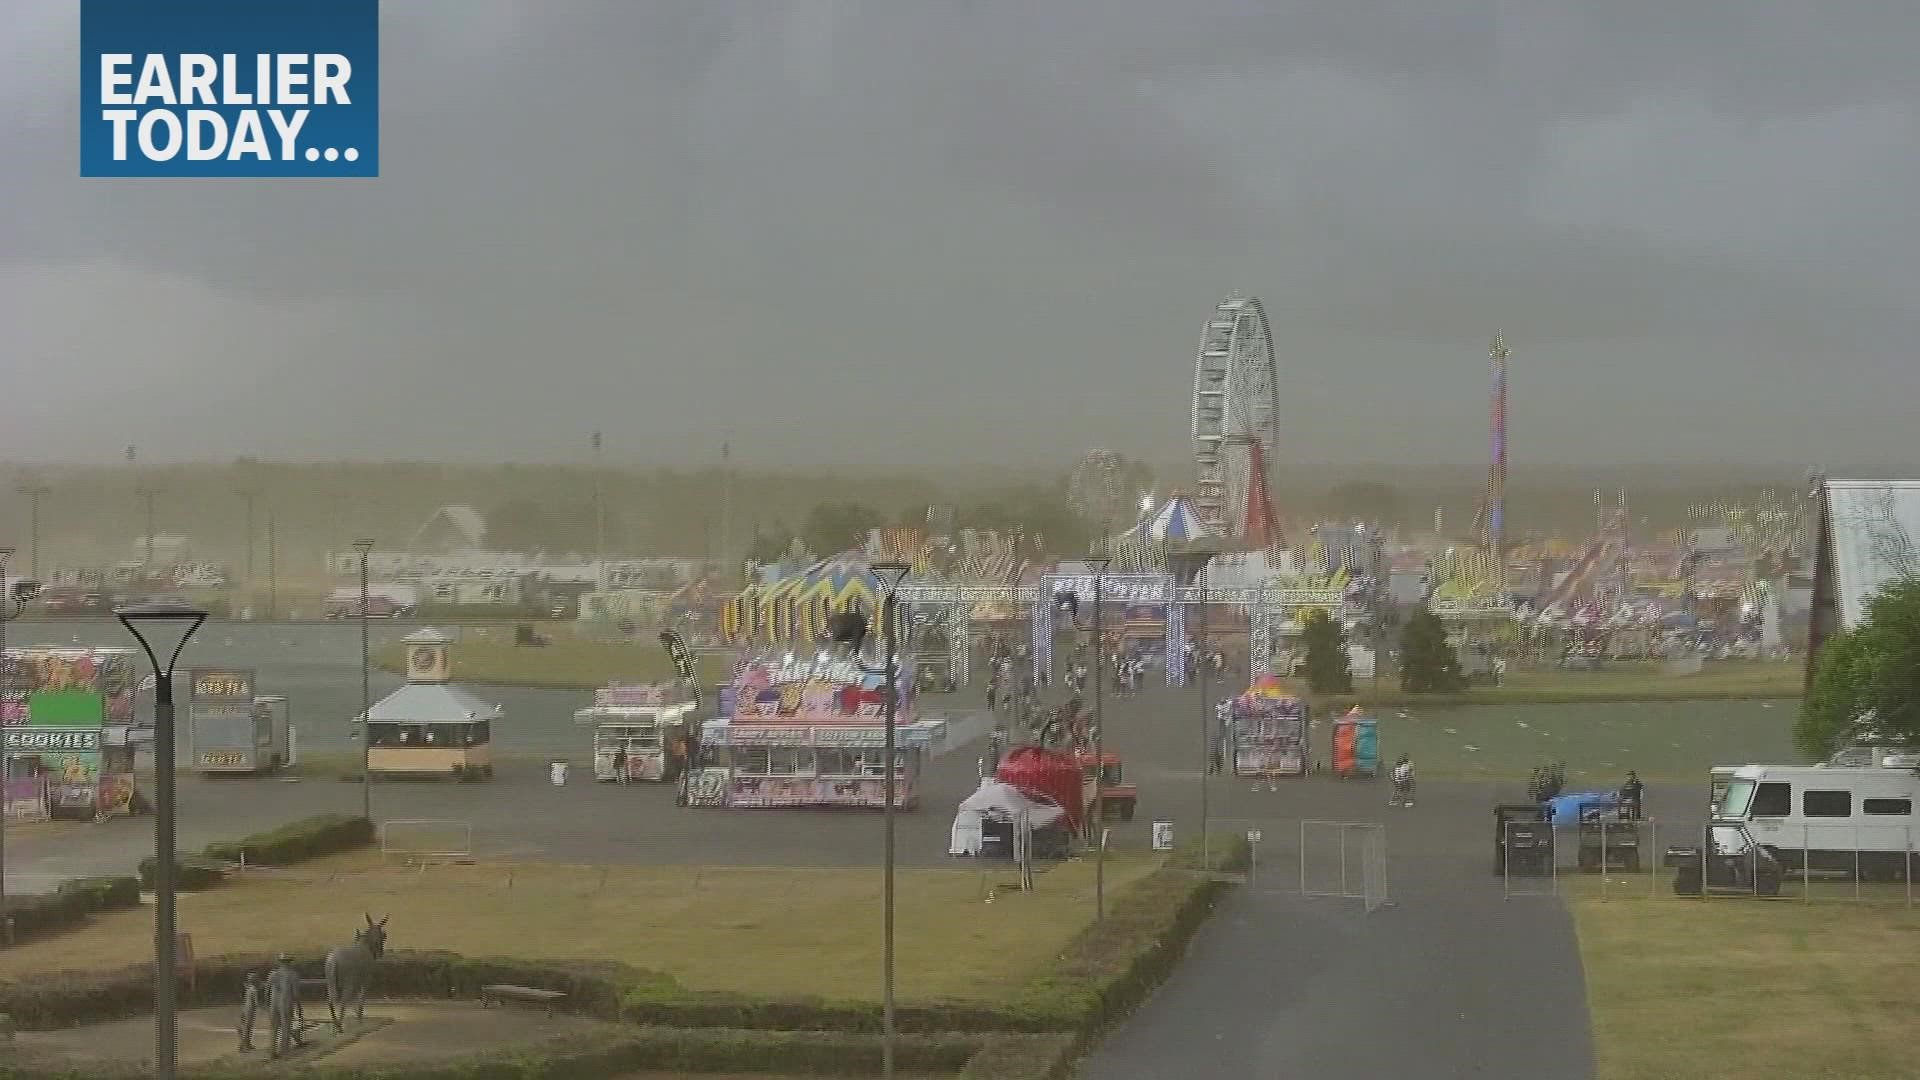 A gust front blew through the Georgia National Fairgrounds before storms arrived Sunday.